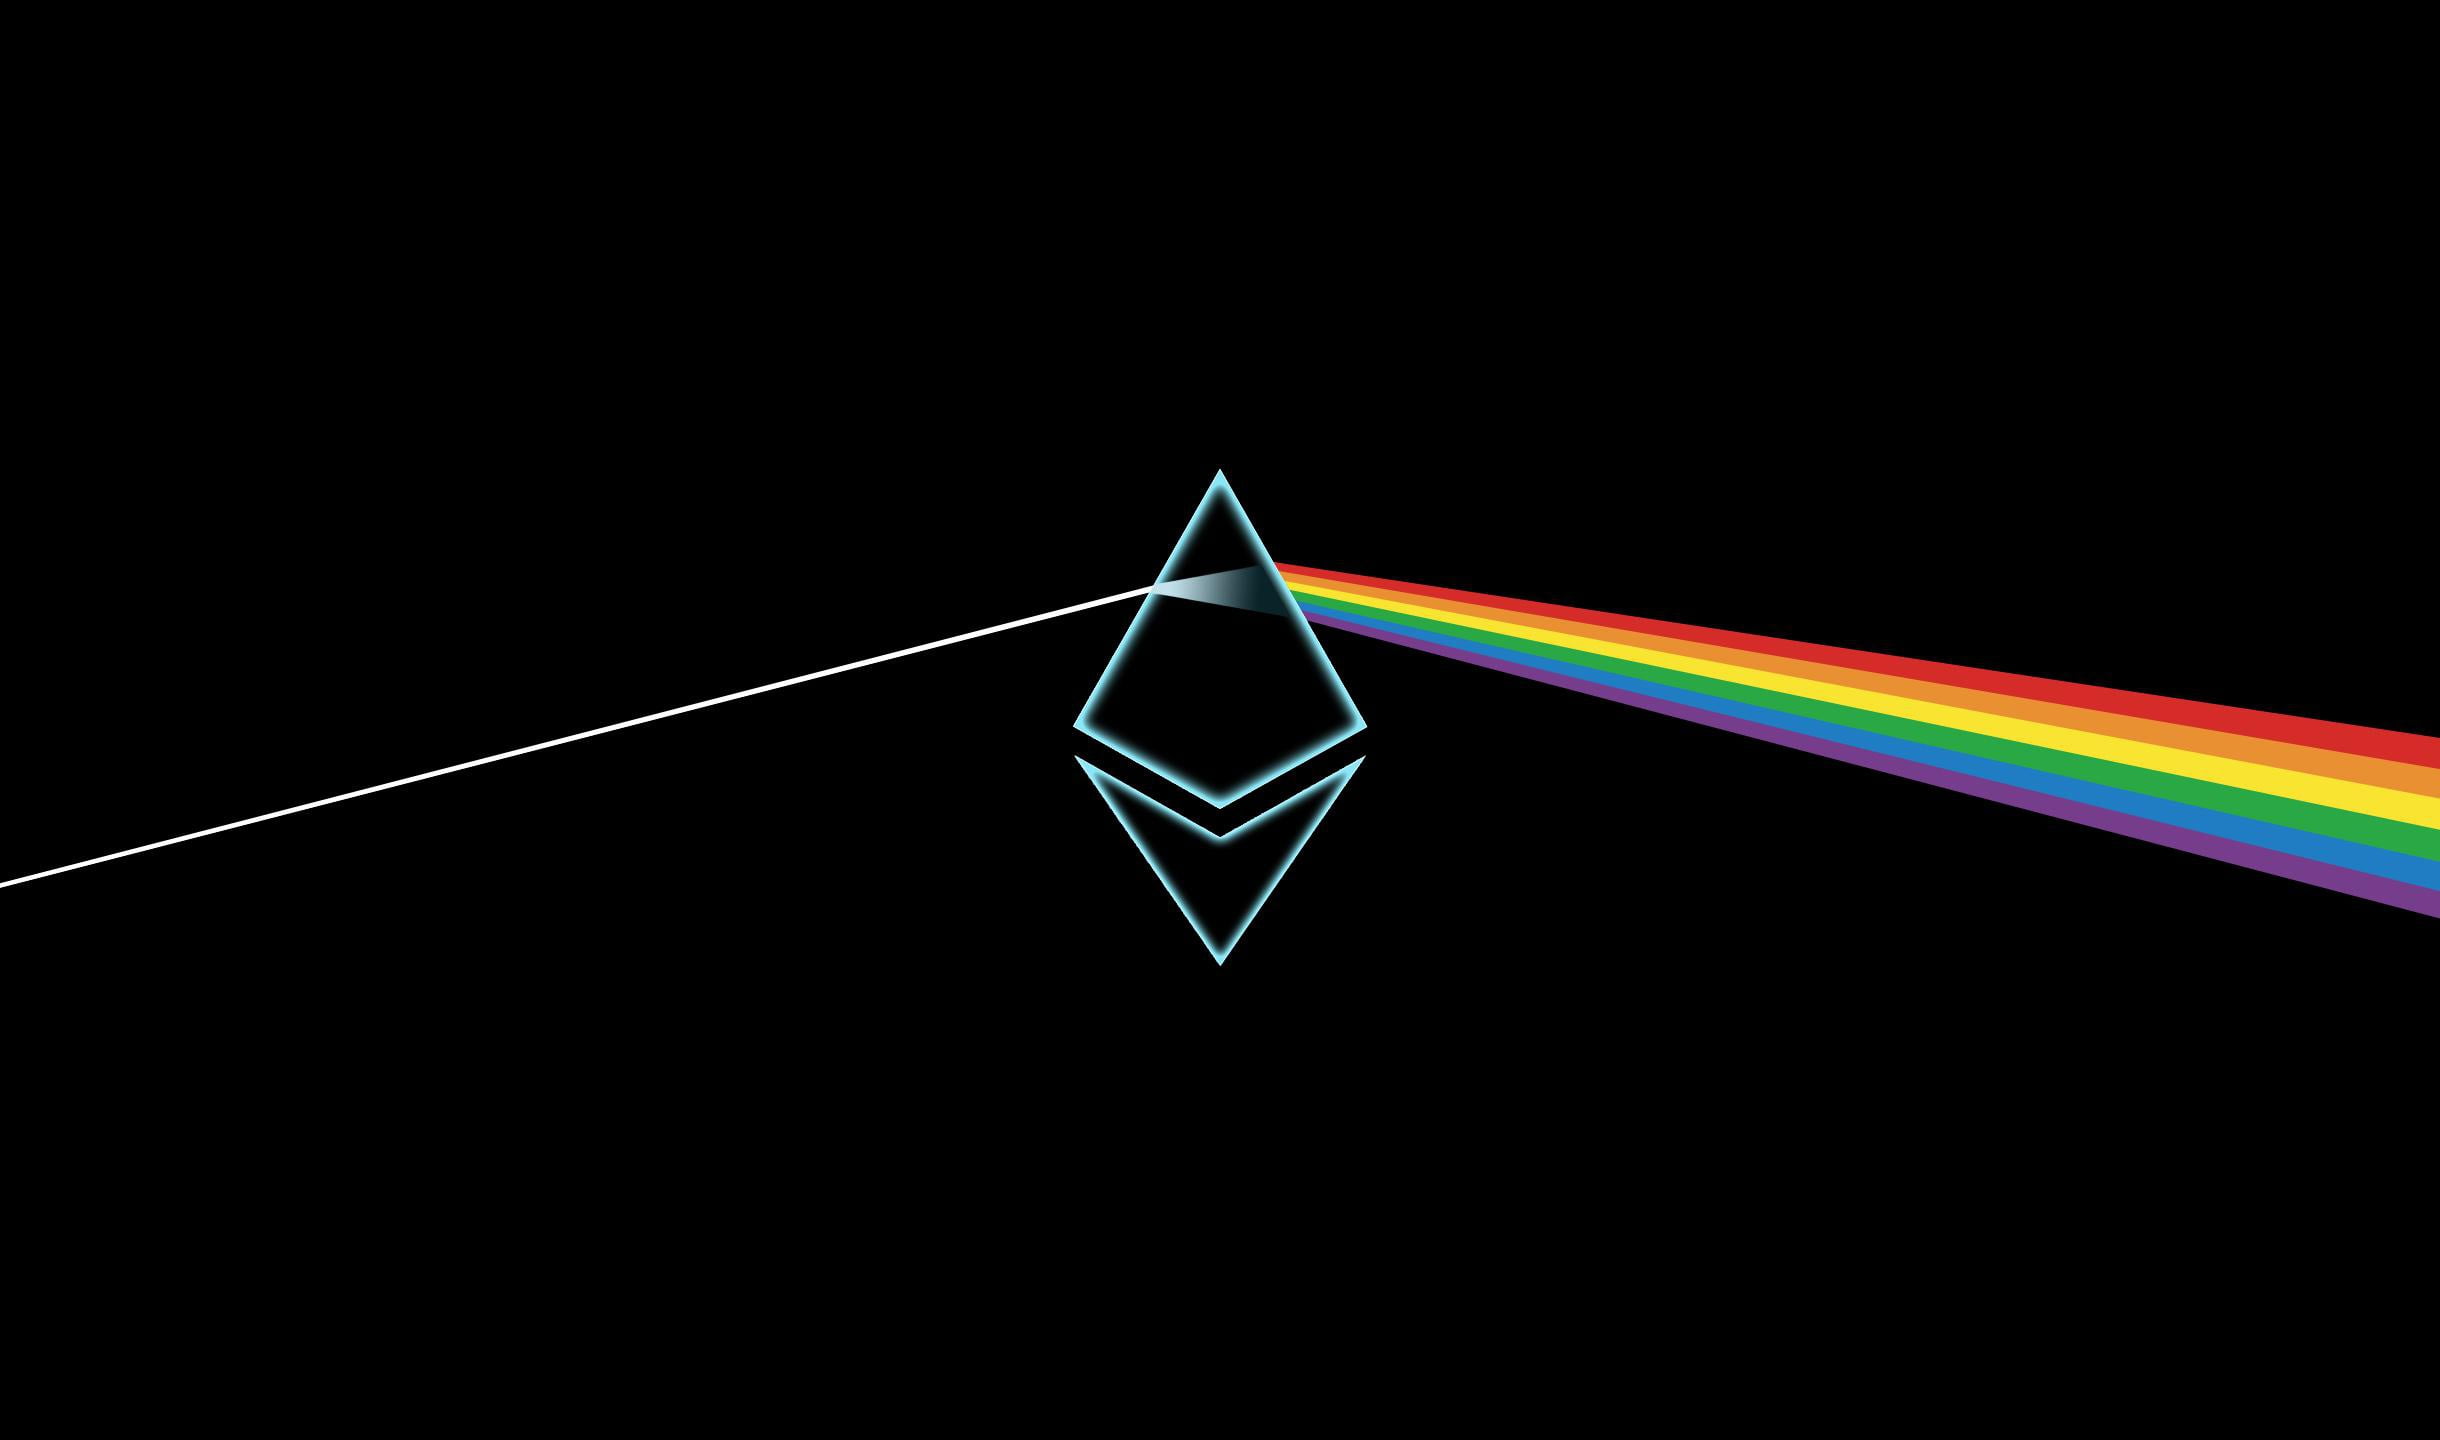 Music, Triangle, Pink Floyd, Prism, Rock, Dark side of the moon